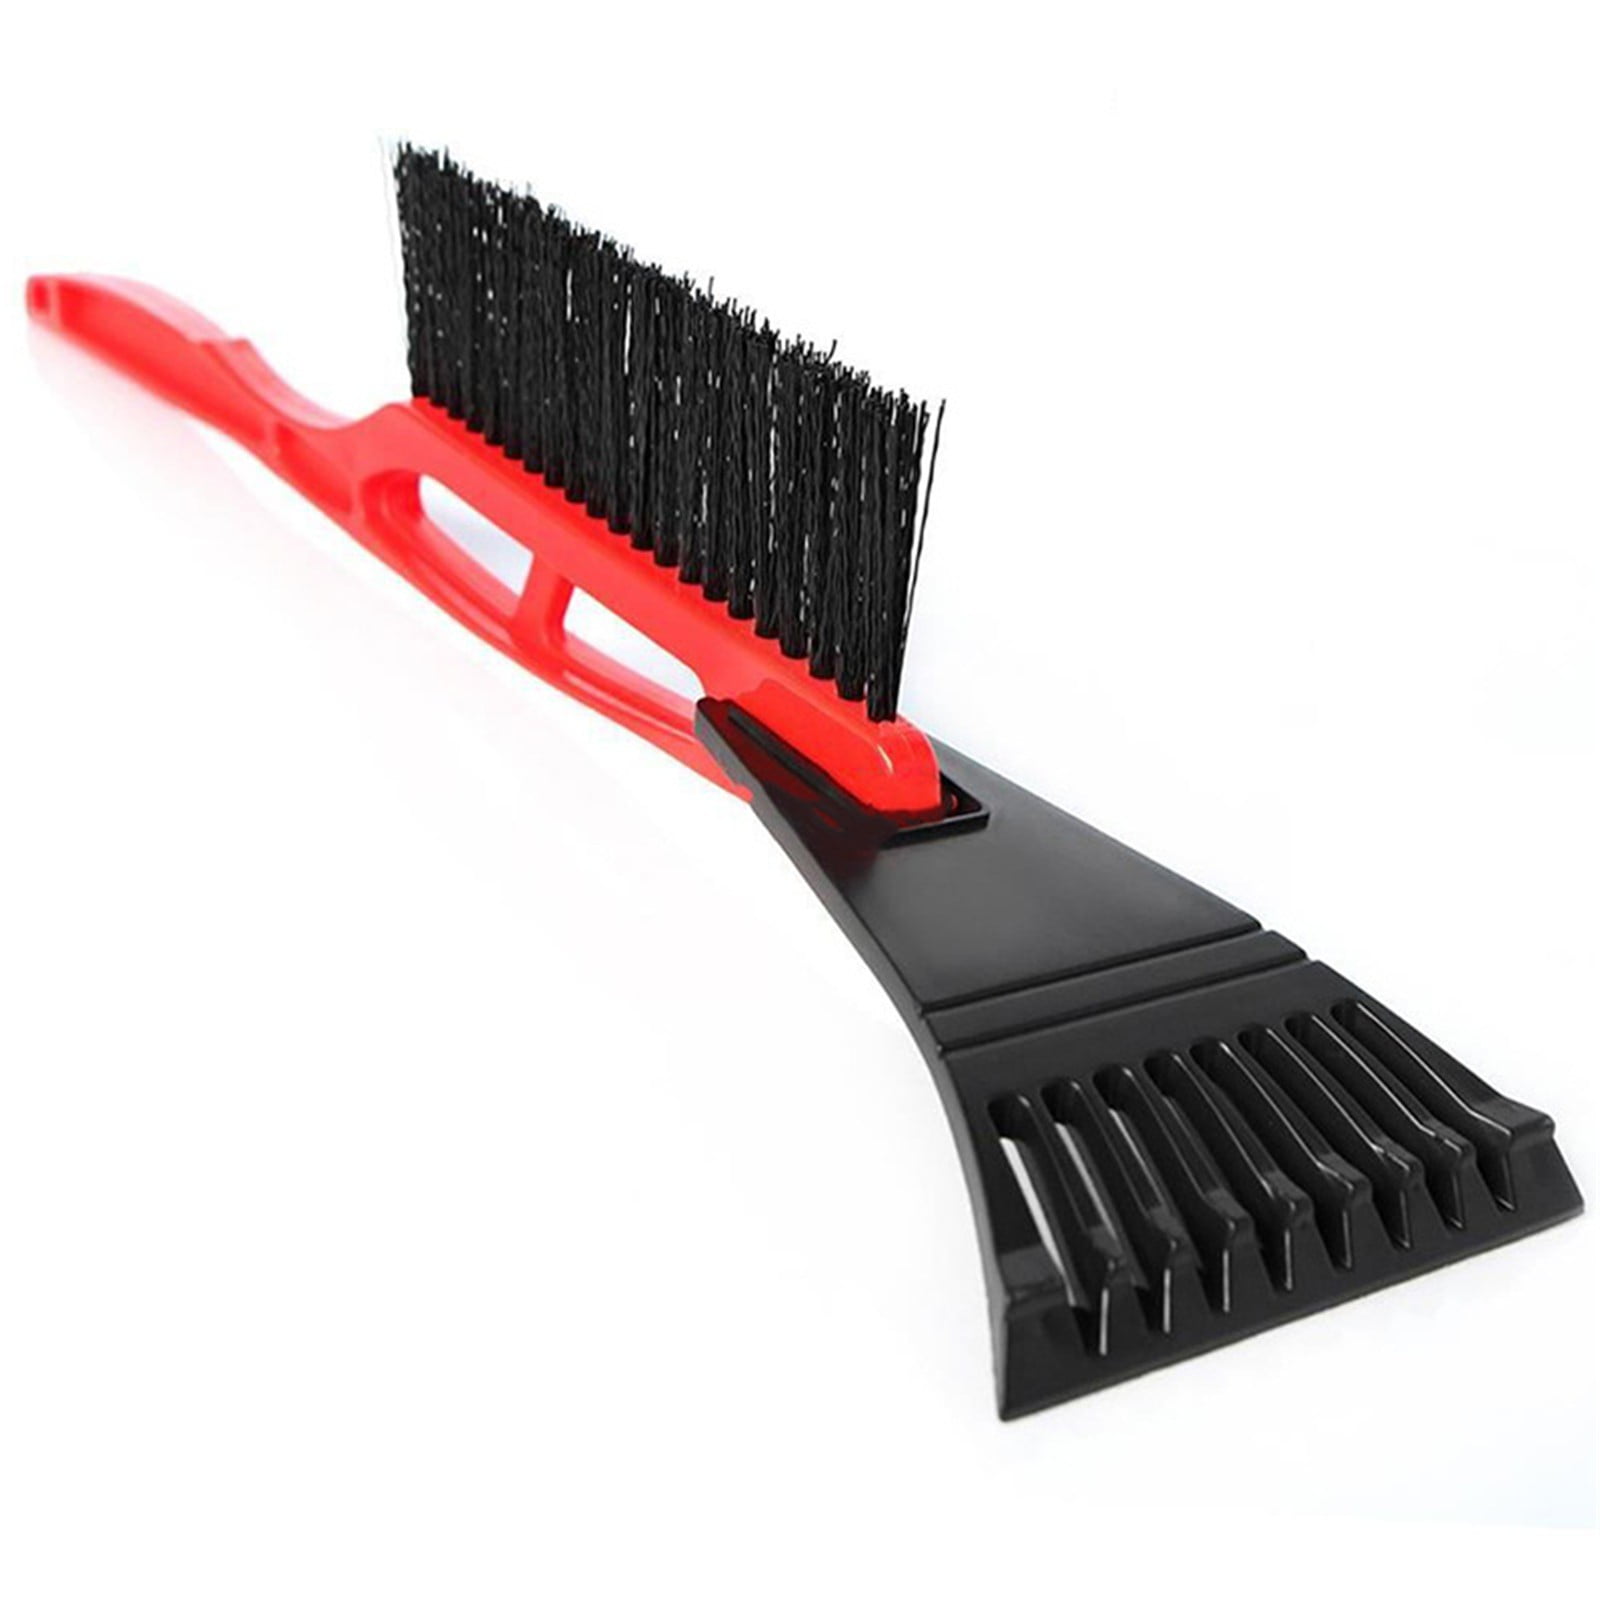 2-in-1 Ice Scraper with Brush for Car Windshield Snow Remove Frost Broom Cleaner 